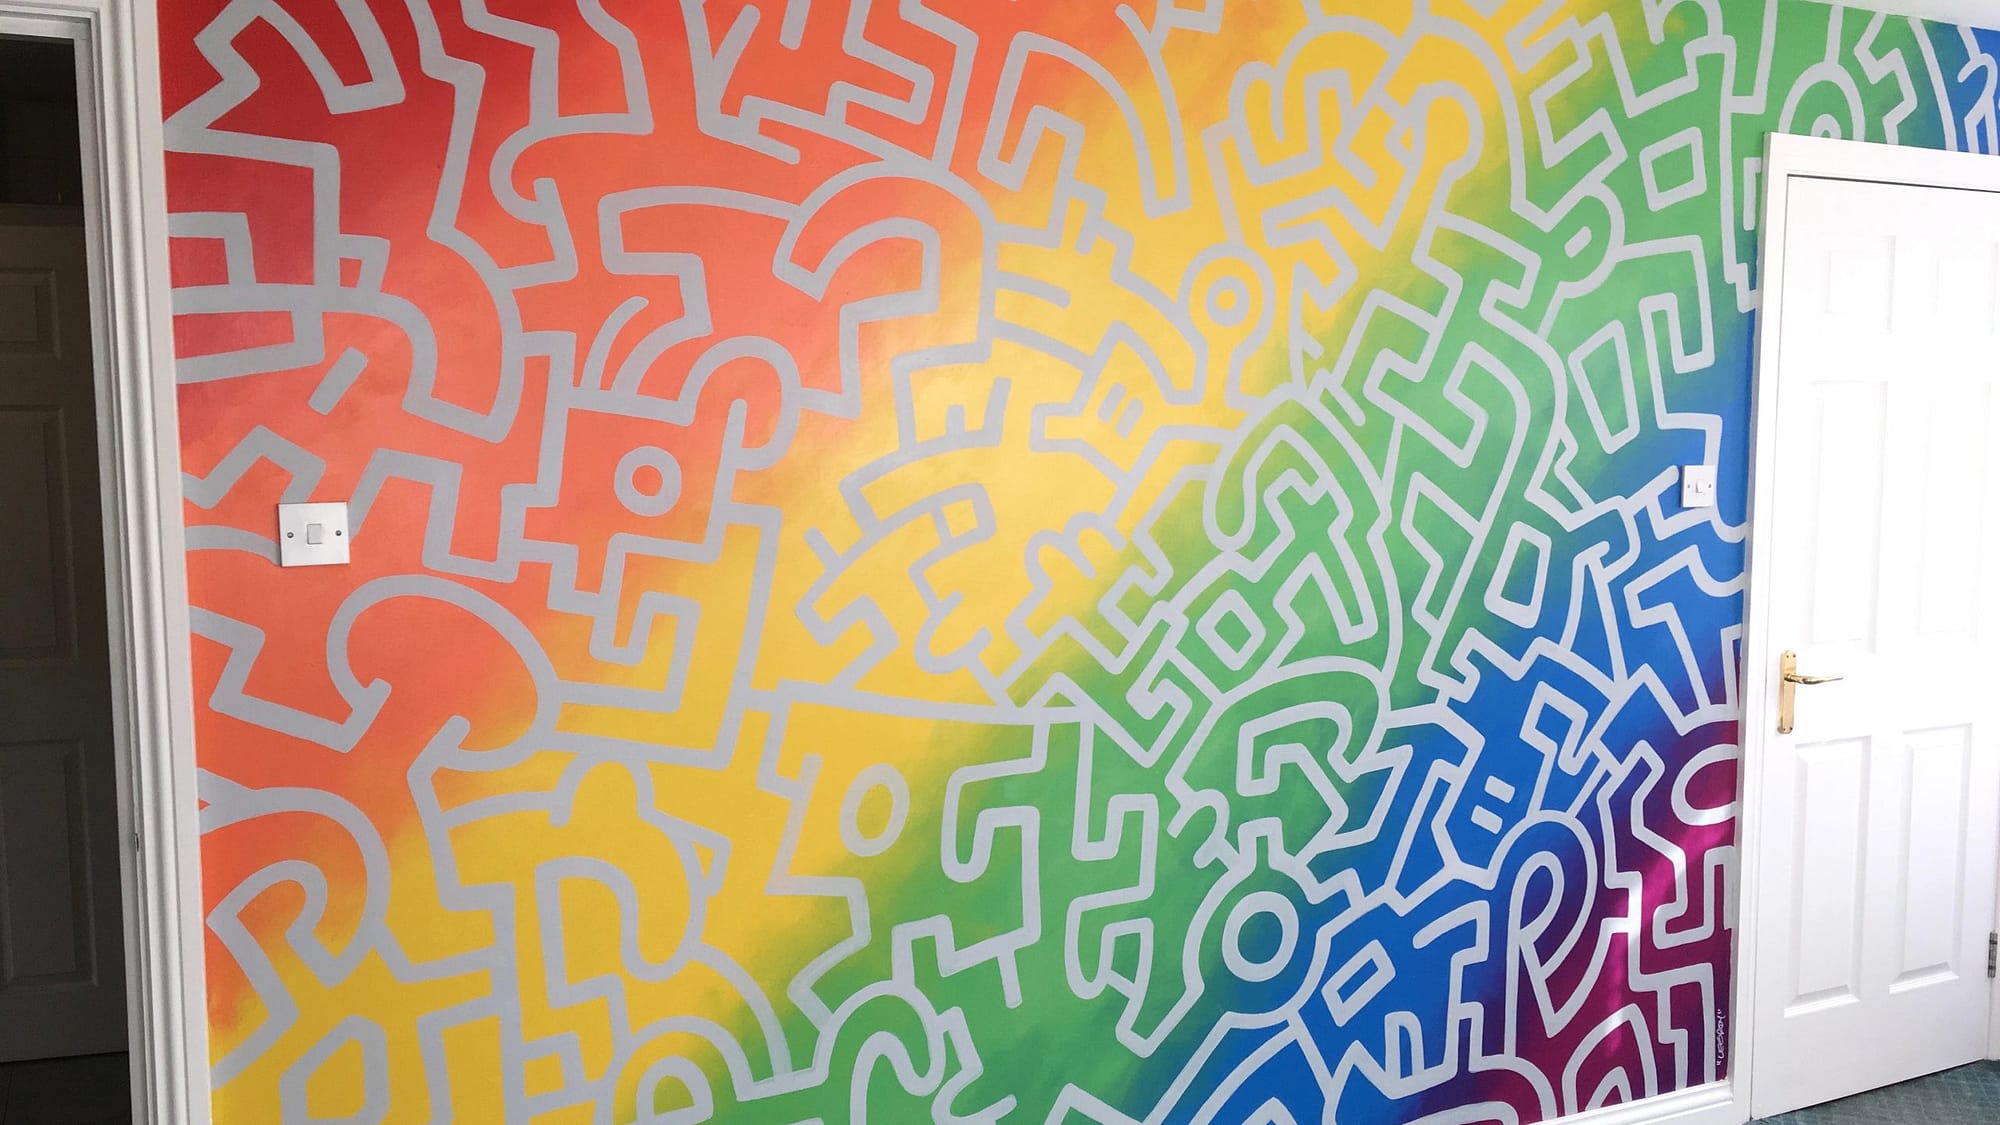 Keith Haring inspired feature wall mural